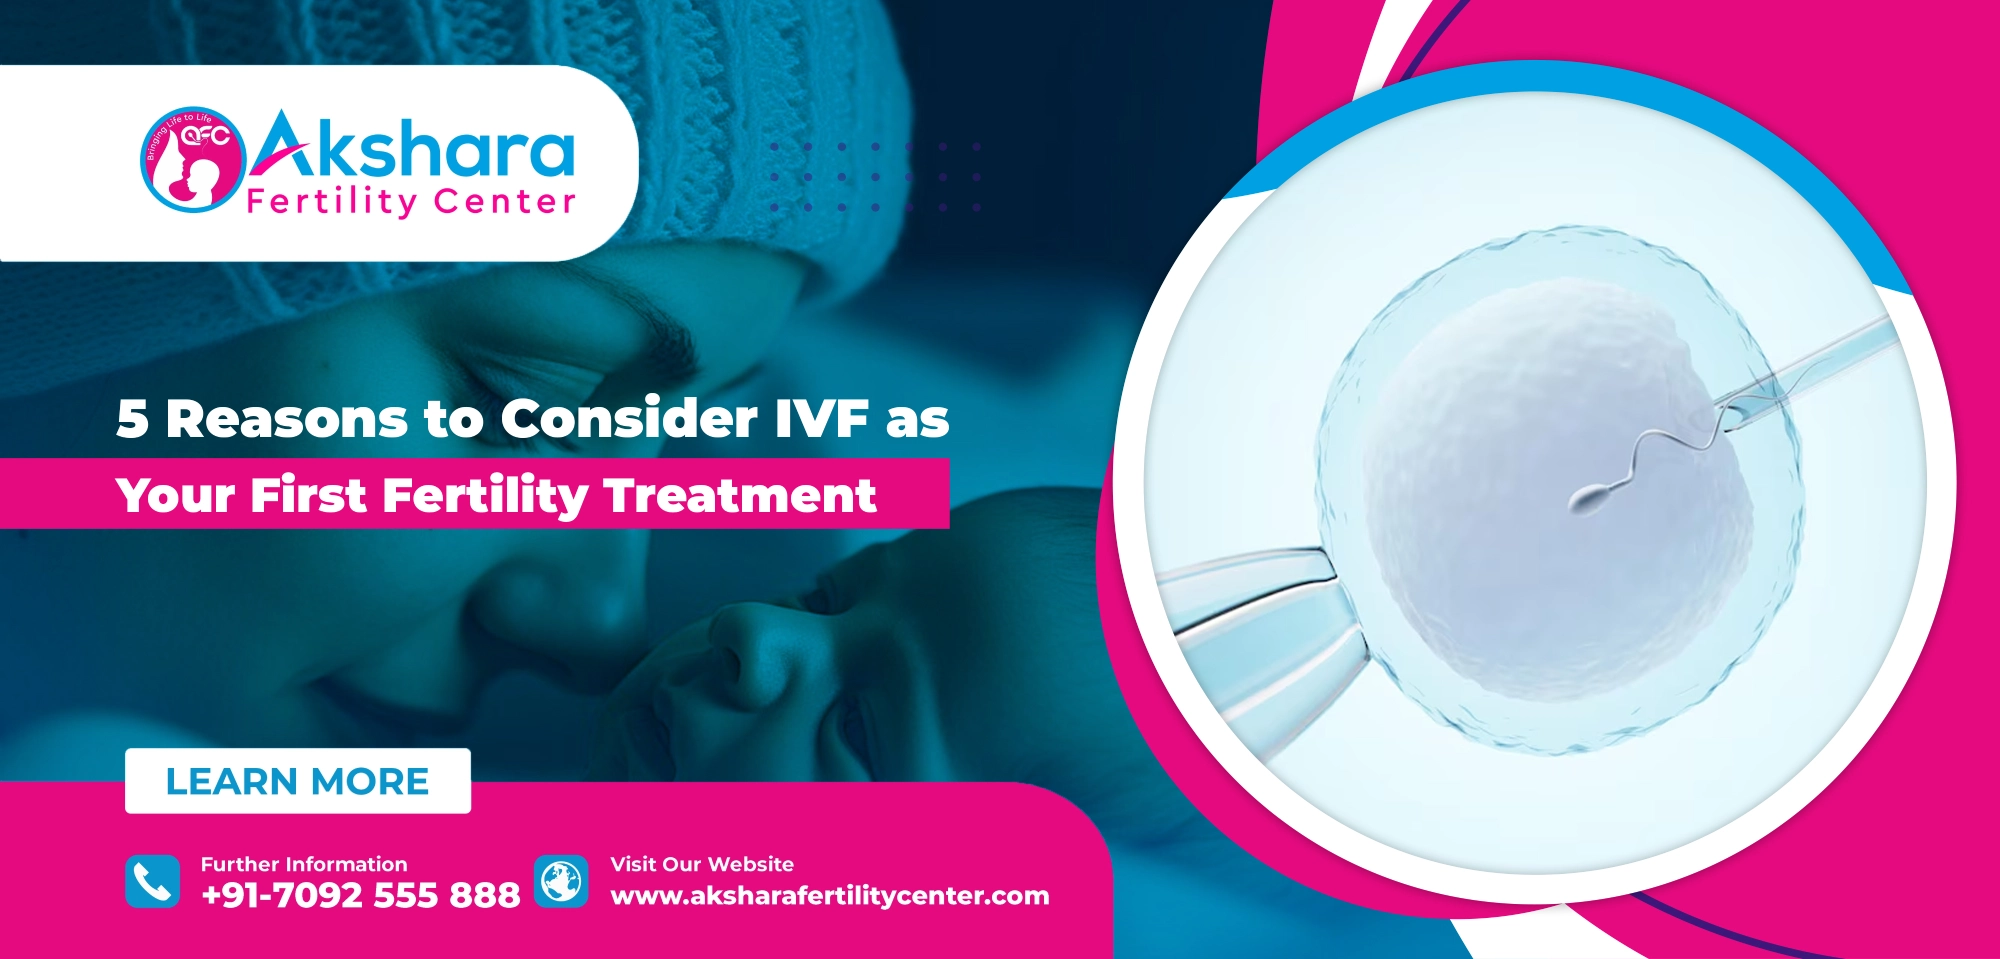 5 Reasons to Consider IVF as Your First Fertility Treatment